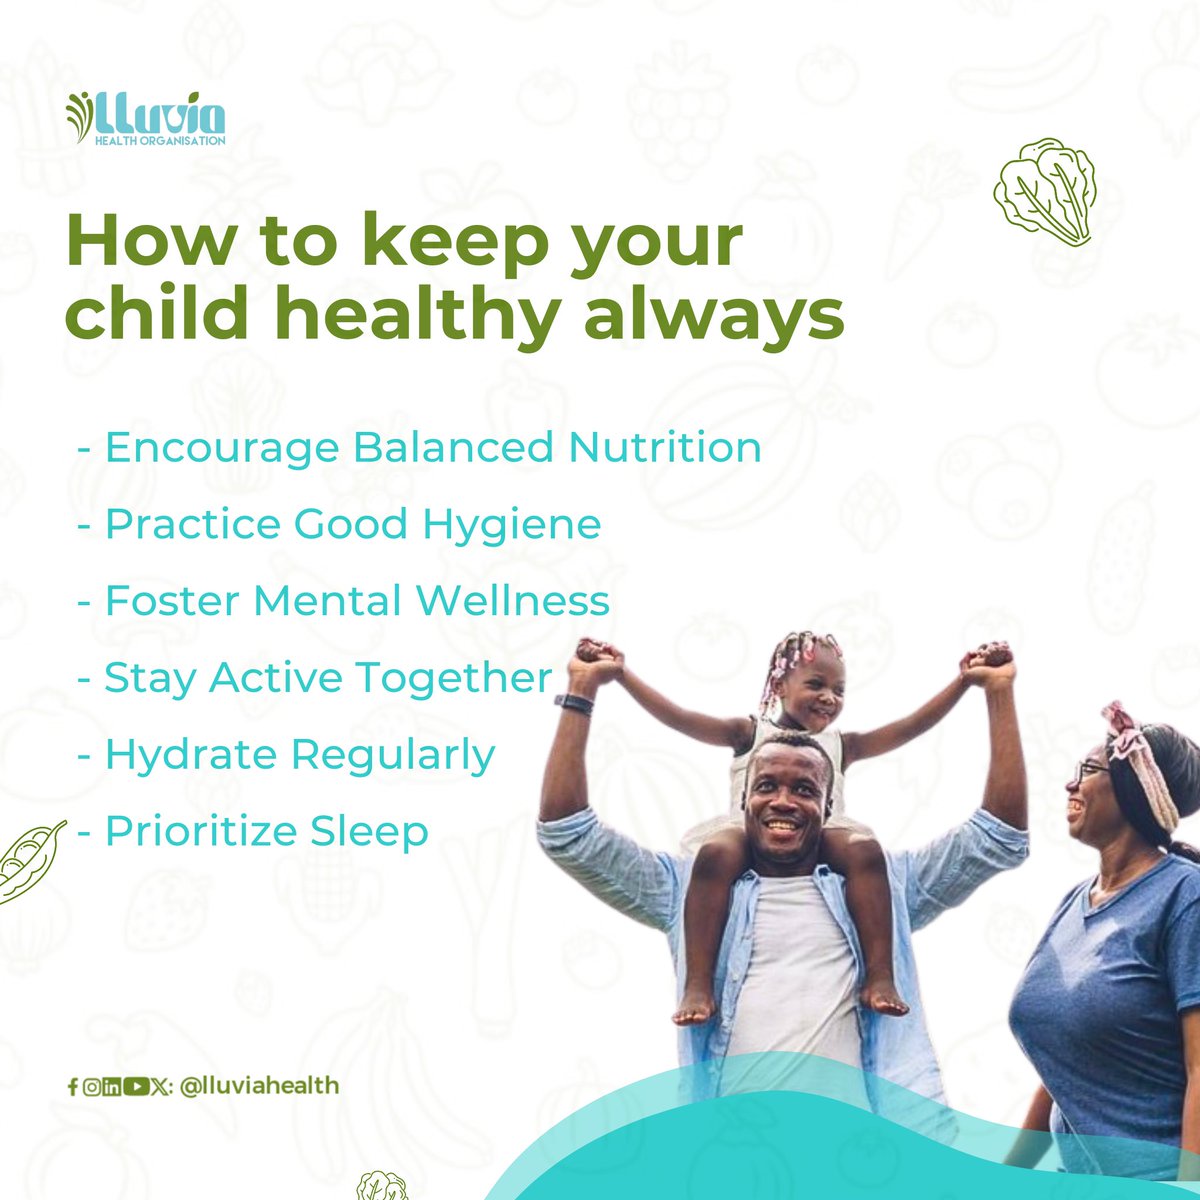 Looking for ways to keep your young one Healthier? Here are a few tips that can help!

If you find any of these helpful, kindly Like, Retweet and leave a thumbs up 👍🏽 in the comment section!👇🏽

#ChildHealth #HealthyKids #NutritionEducation #FamilyHealth #HealthyLiving  #WellBeing